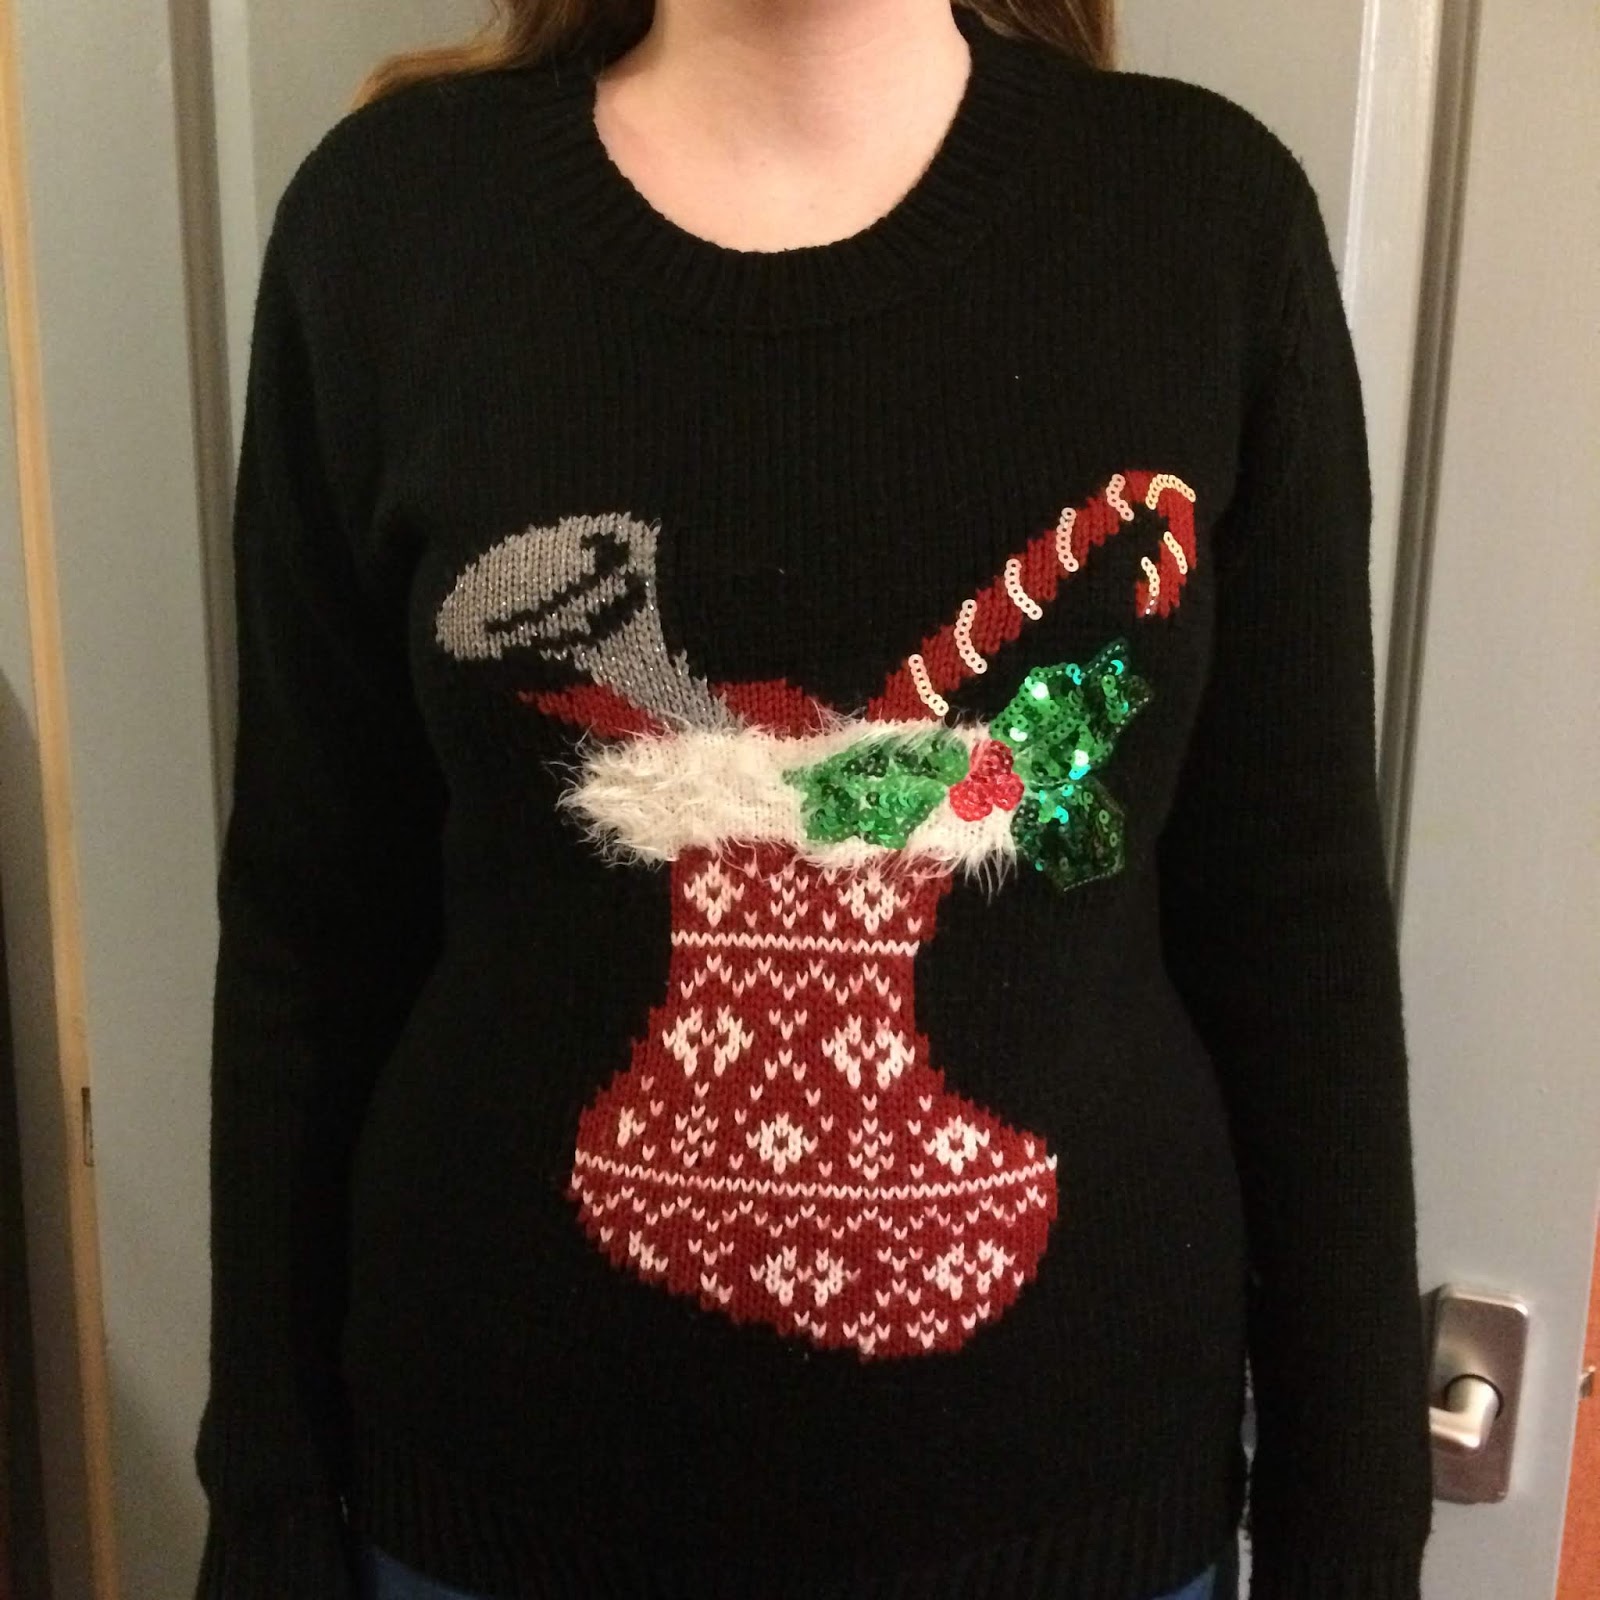 A black jumper featuring a red stocking with a white nordic pattern, with a white fluffy trim, and sequined holly. There's a candy cane and a horn.